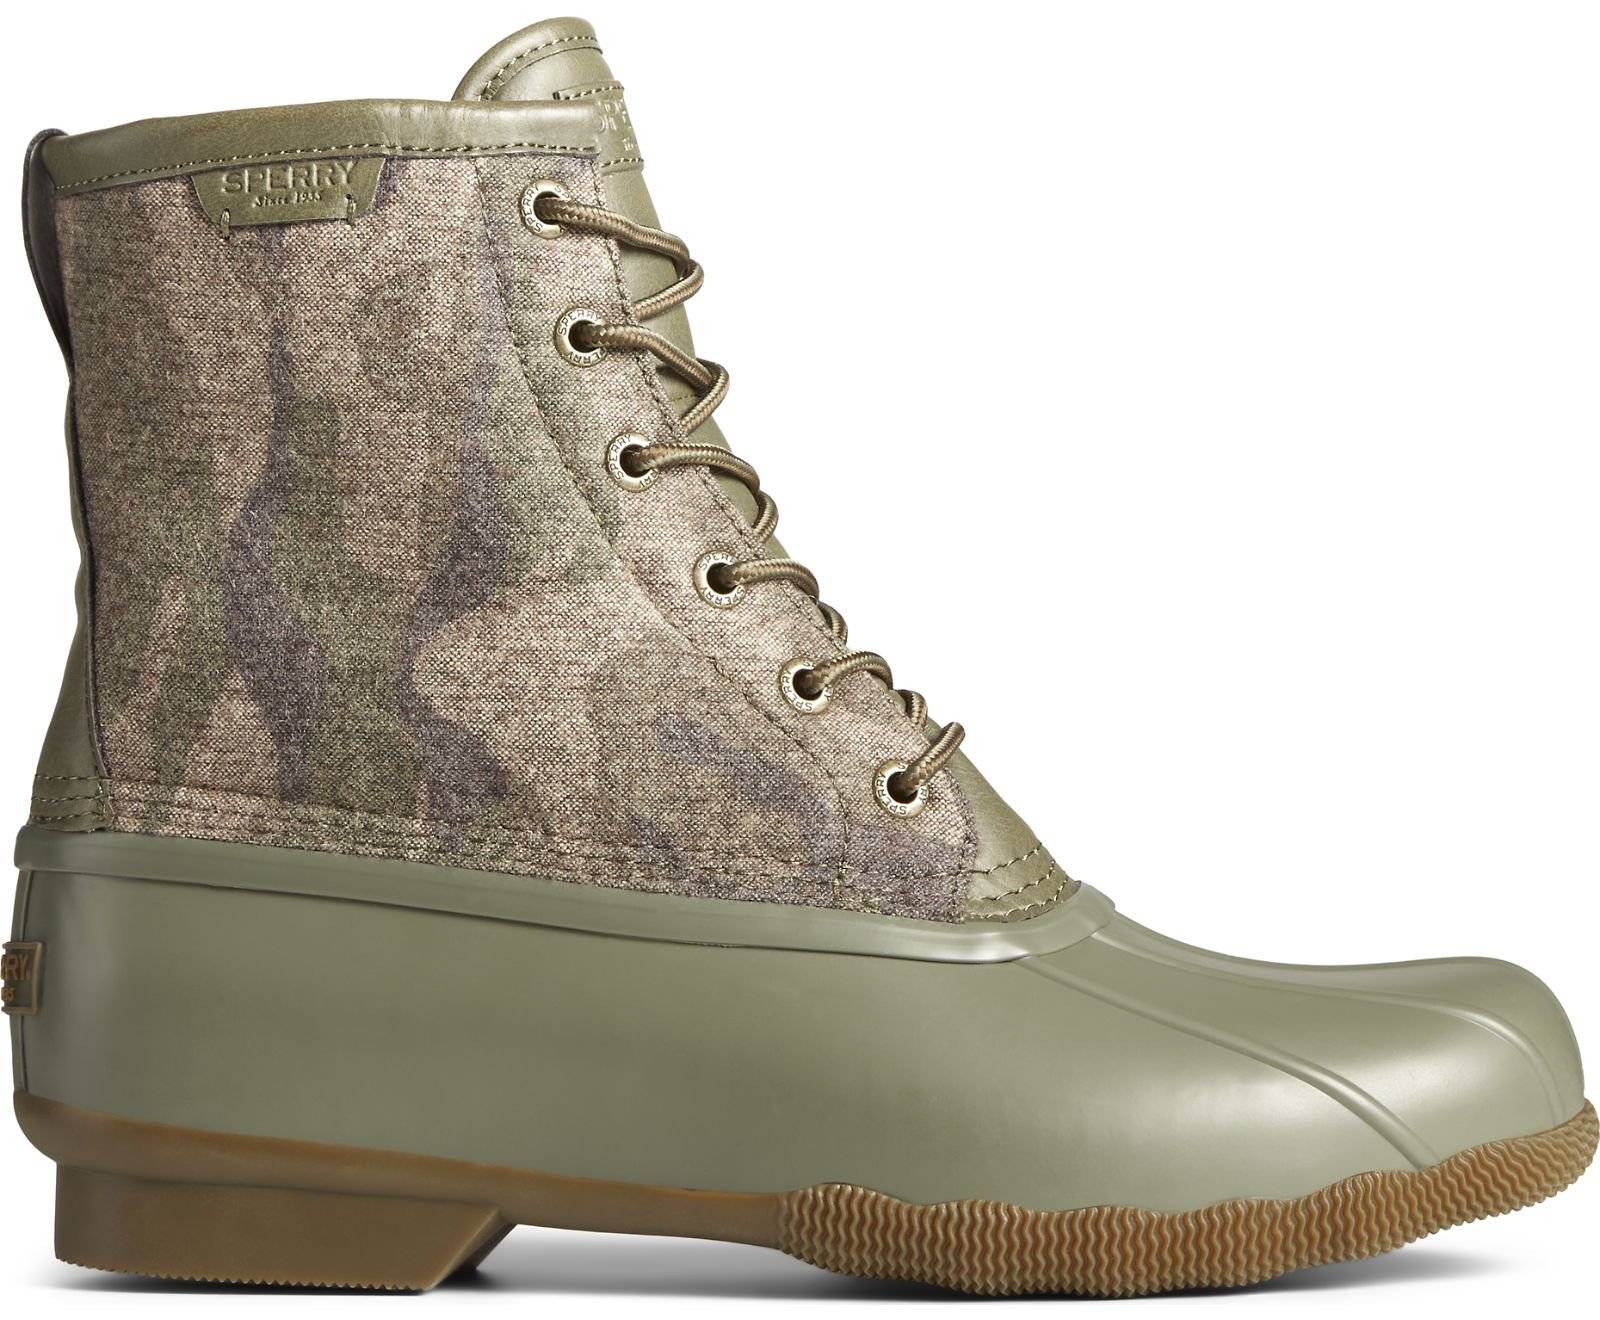 Men's Saltwater Camo Duck Boot - Olive Camo - Click Image to Close